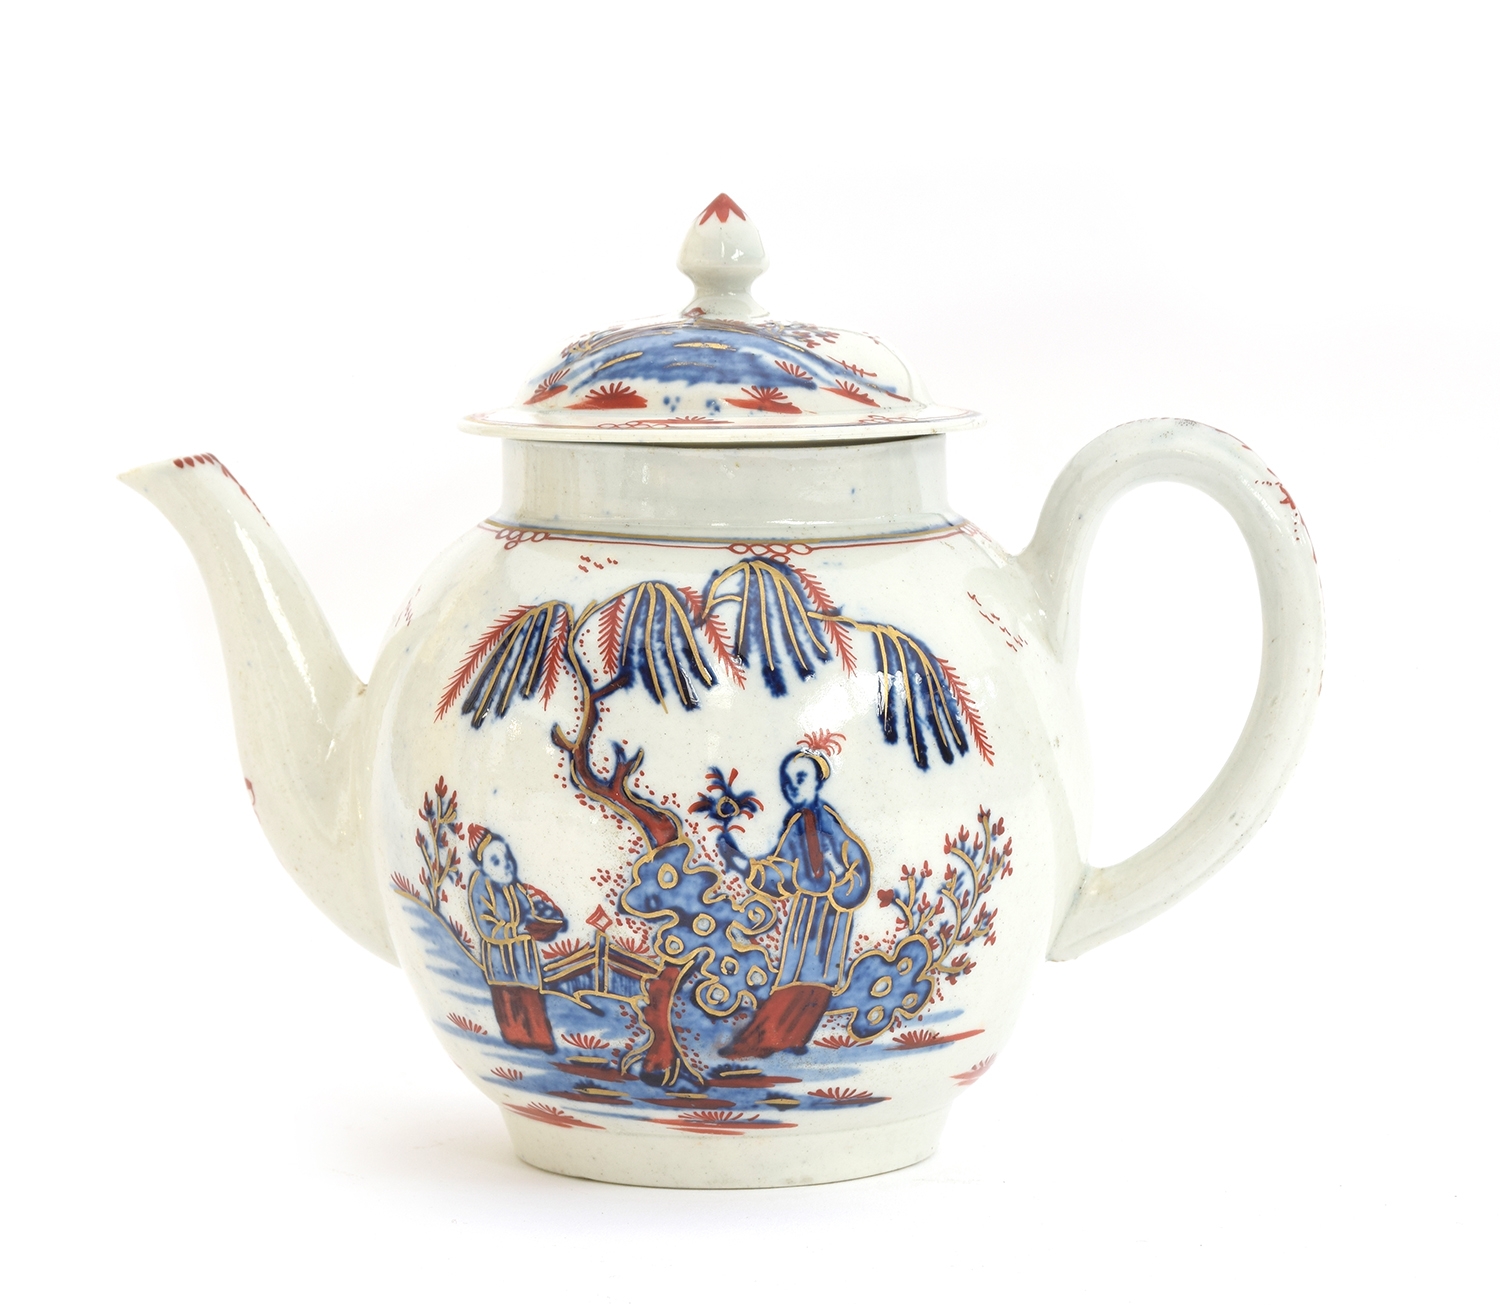 A late 18th century Liverpool Seth Pennington teapot and cover c.1780, 'Lady and Servant' pattern, - Image 2 of 2